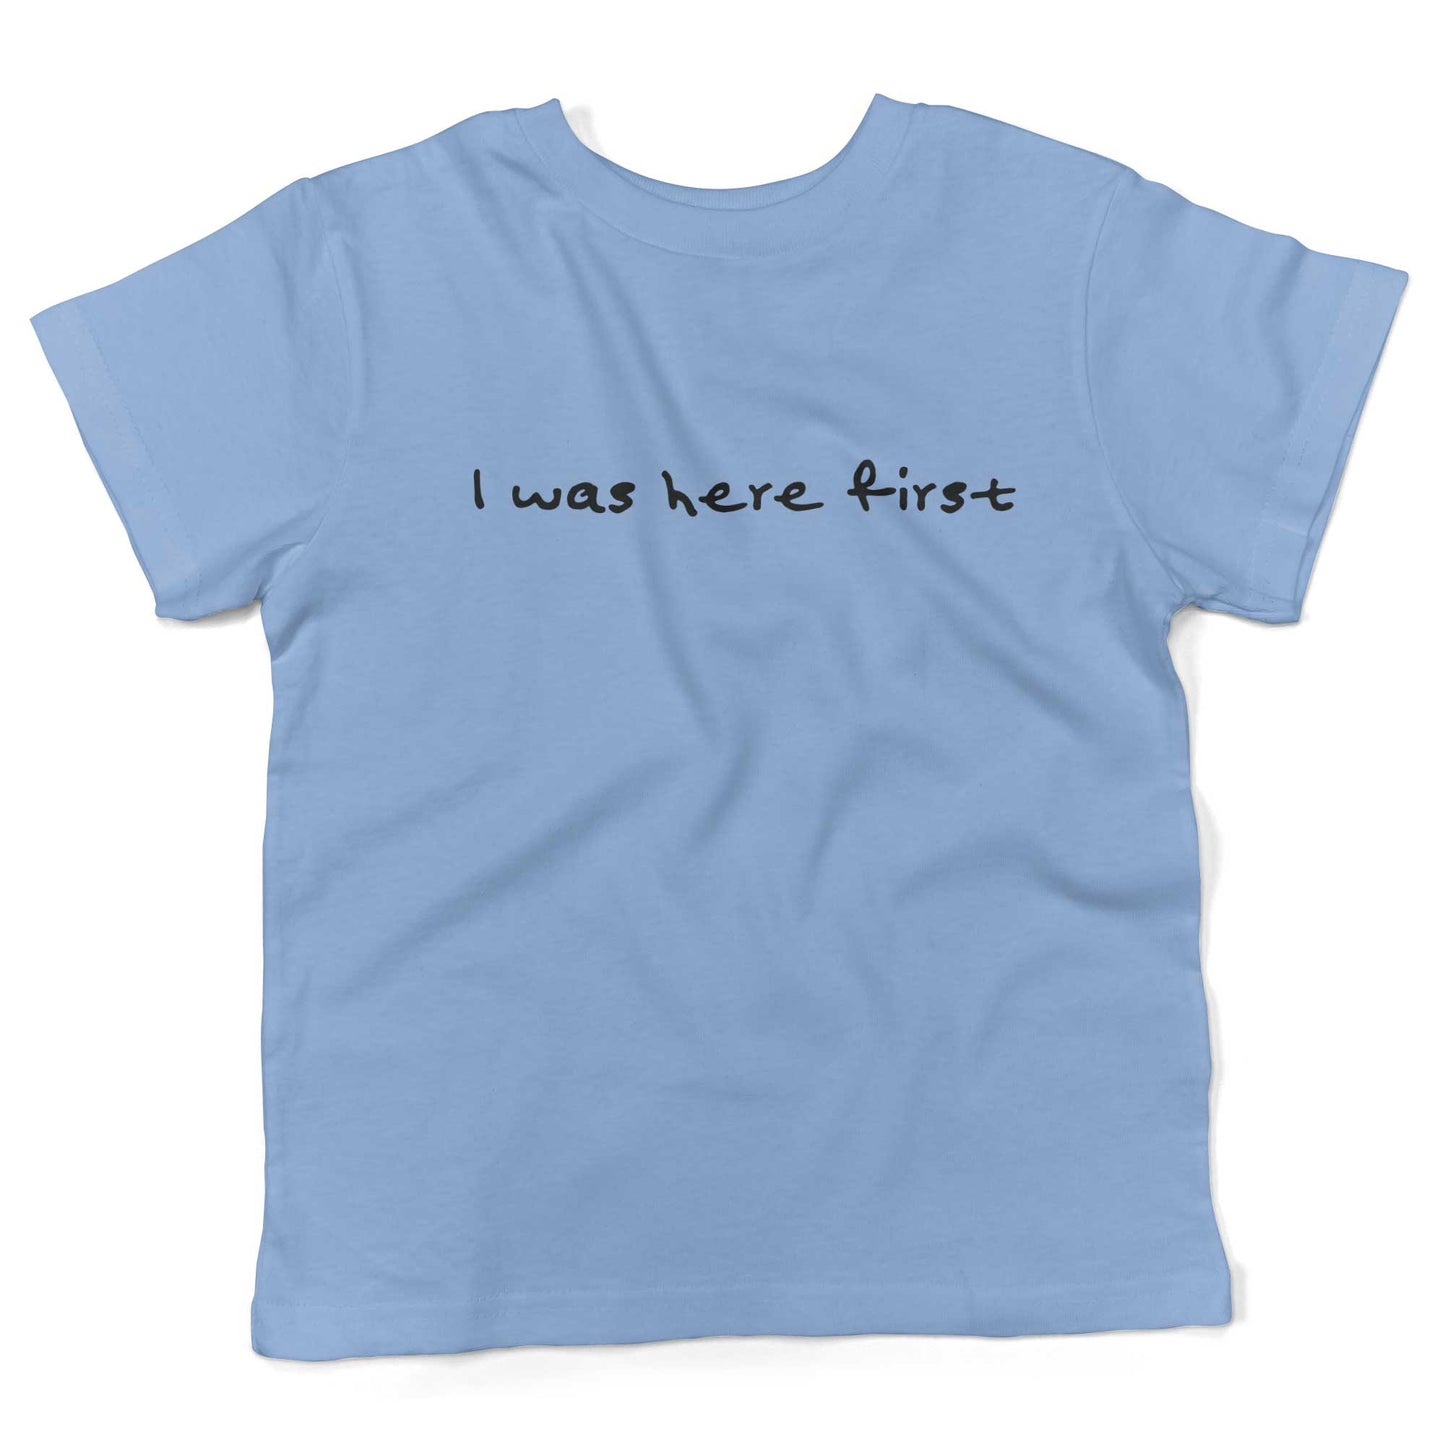 I Was Here First Toddler Shirt-Organic Baby Blue-2T